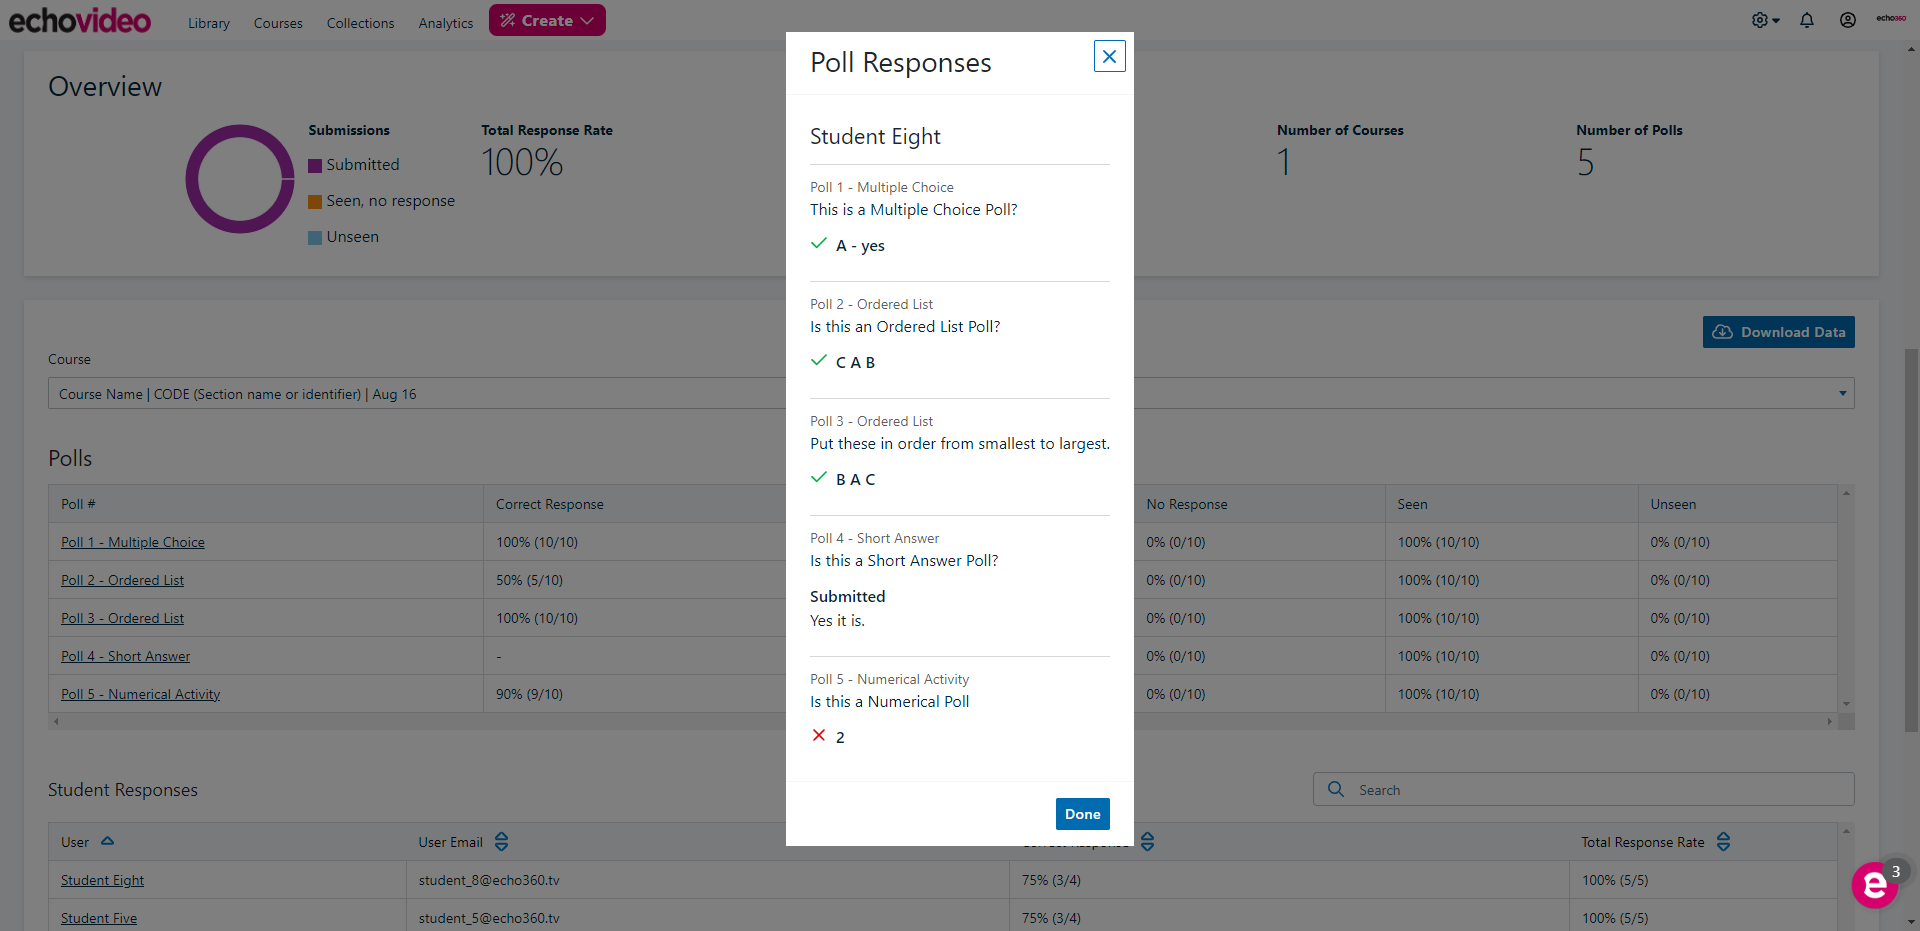 popup modal showing the selected student's responses to all polls in the media as described